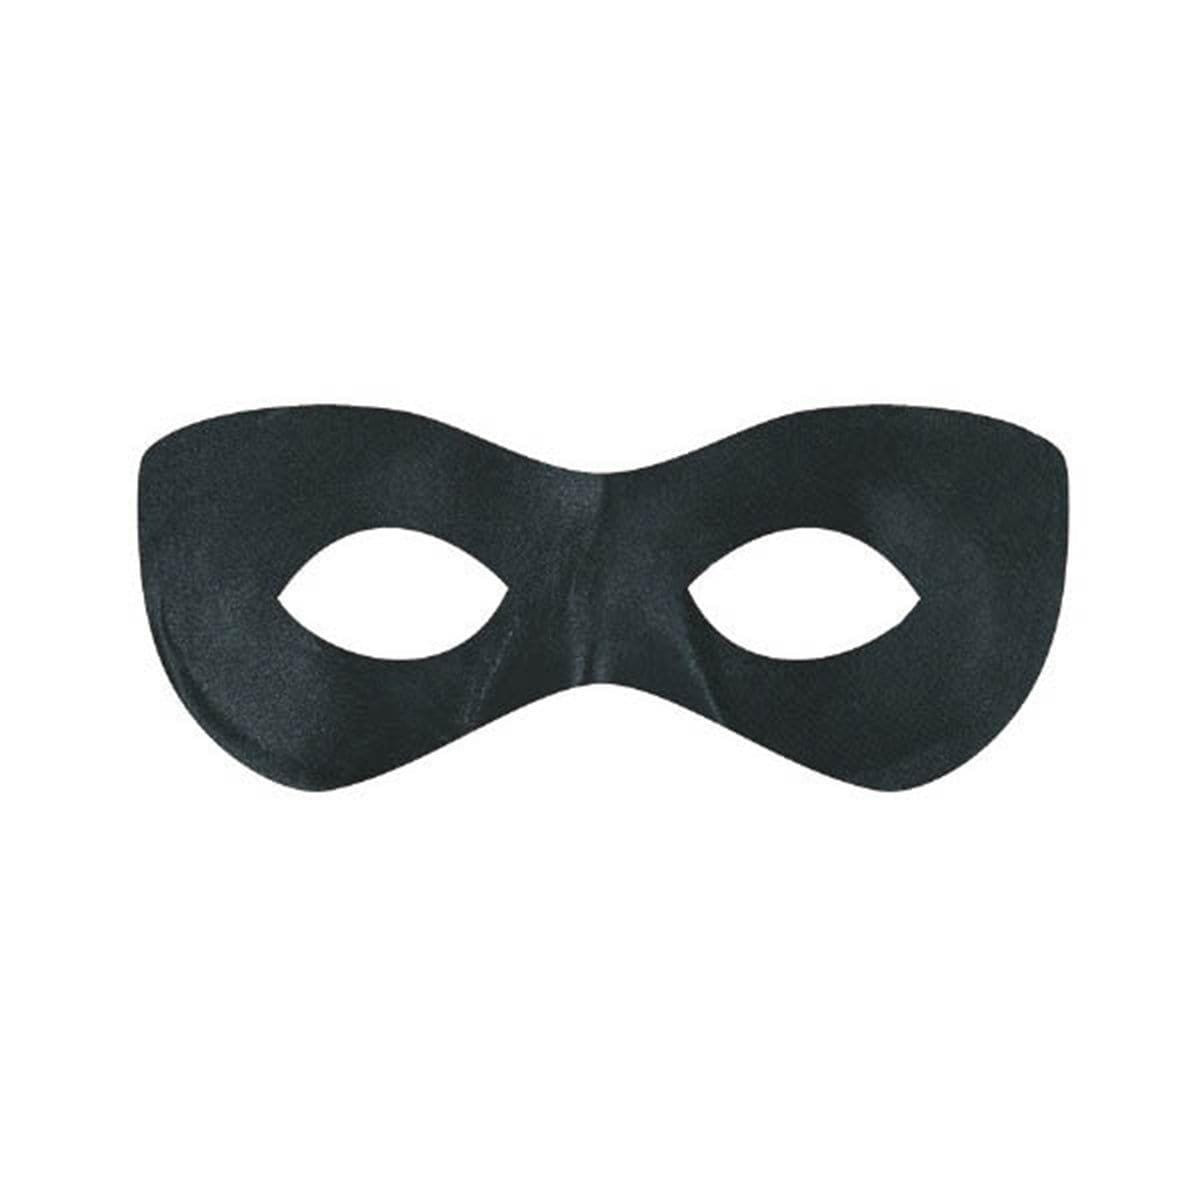 Buy Costume Accessories Black super hero mask for adults sold at Party Expert